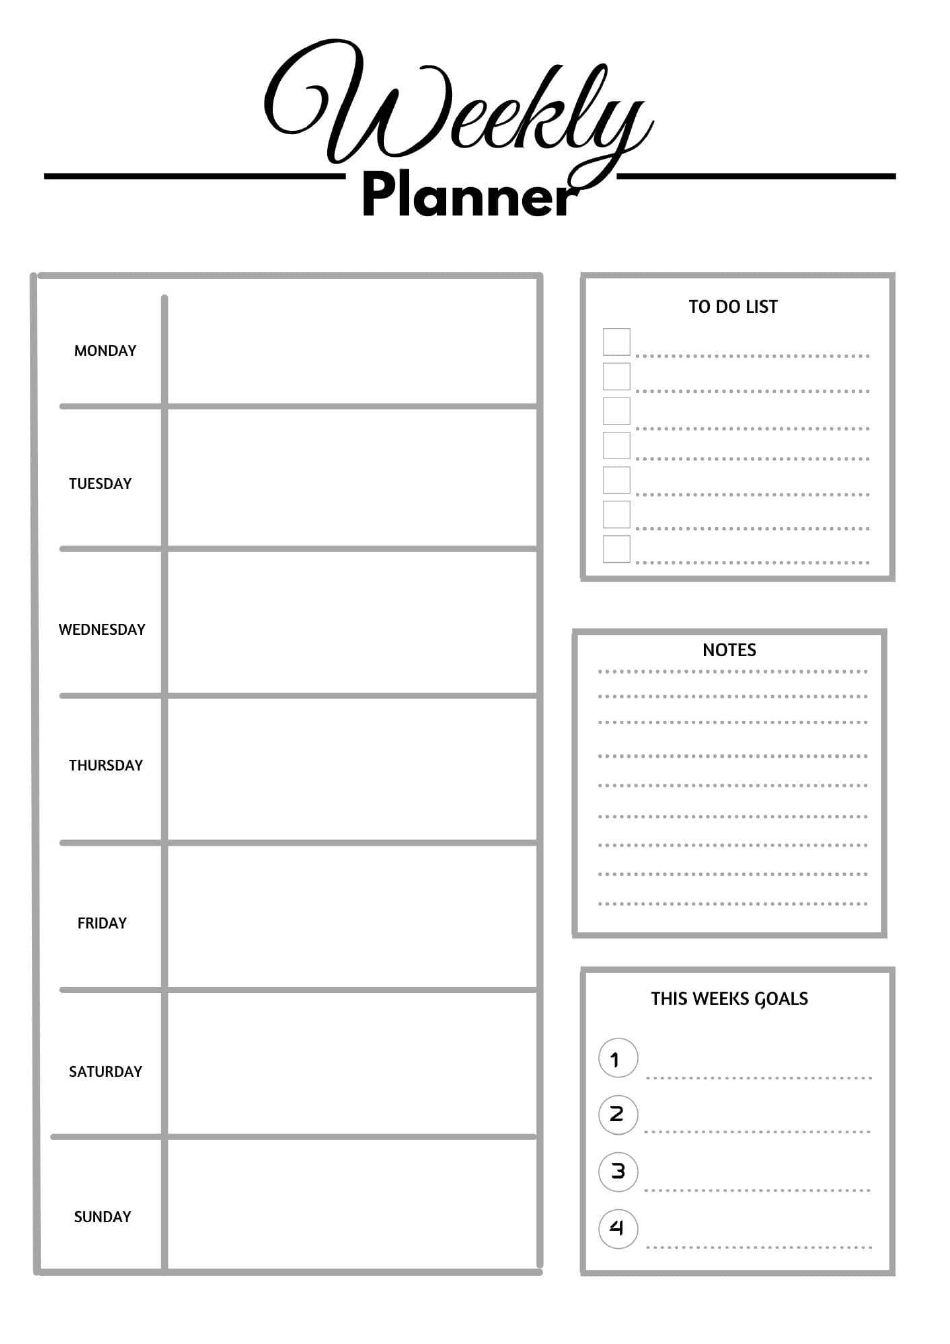 Weekly Planner Template - Seven Days